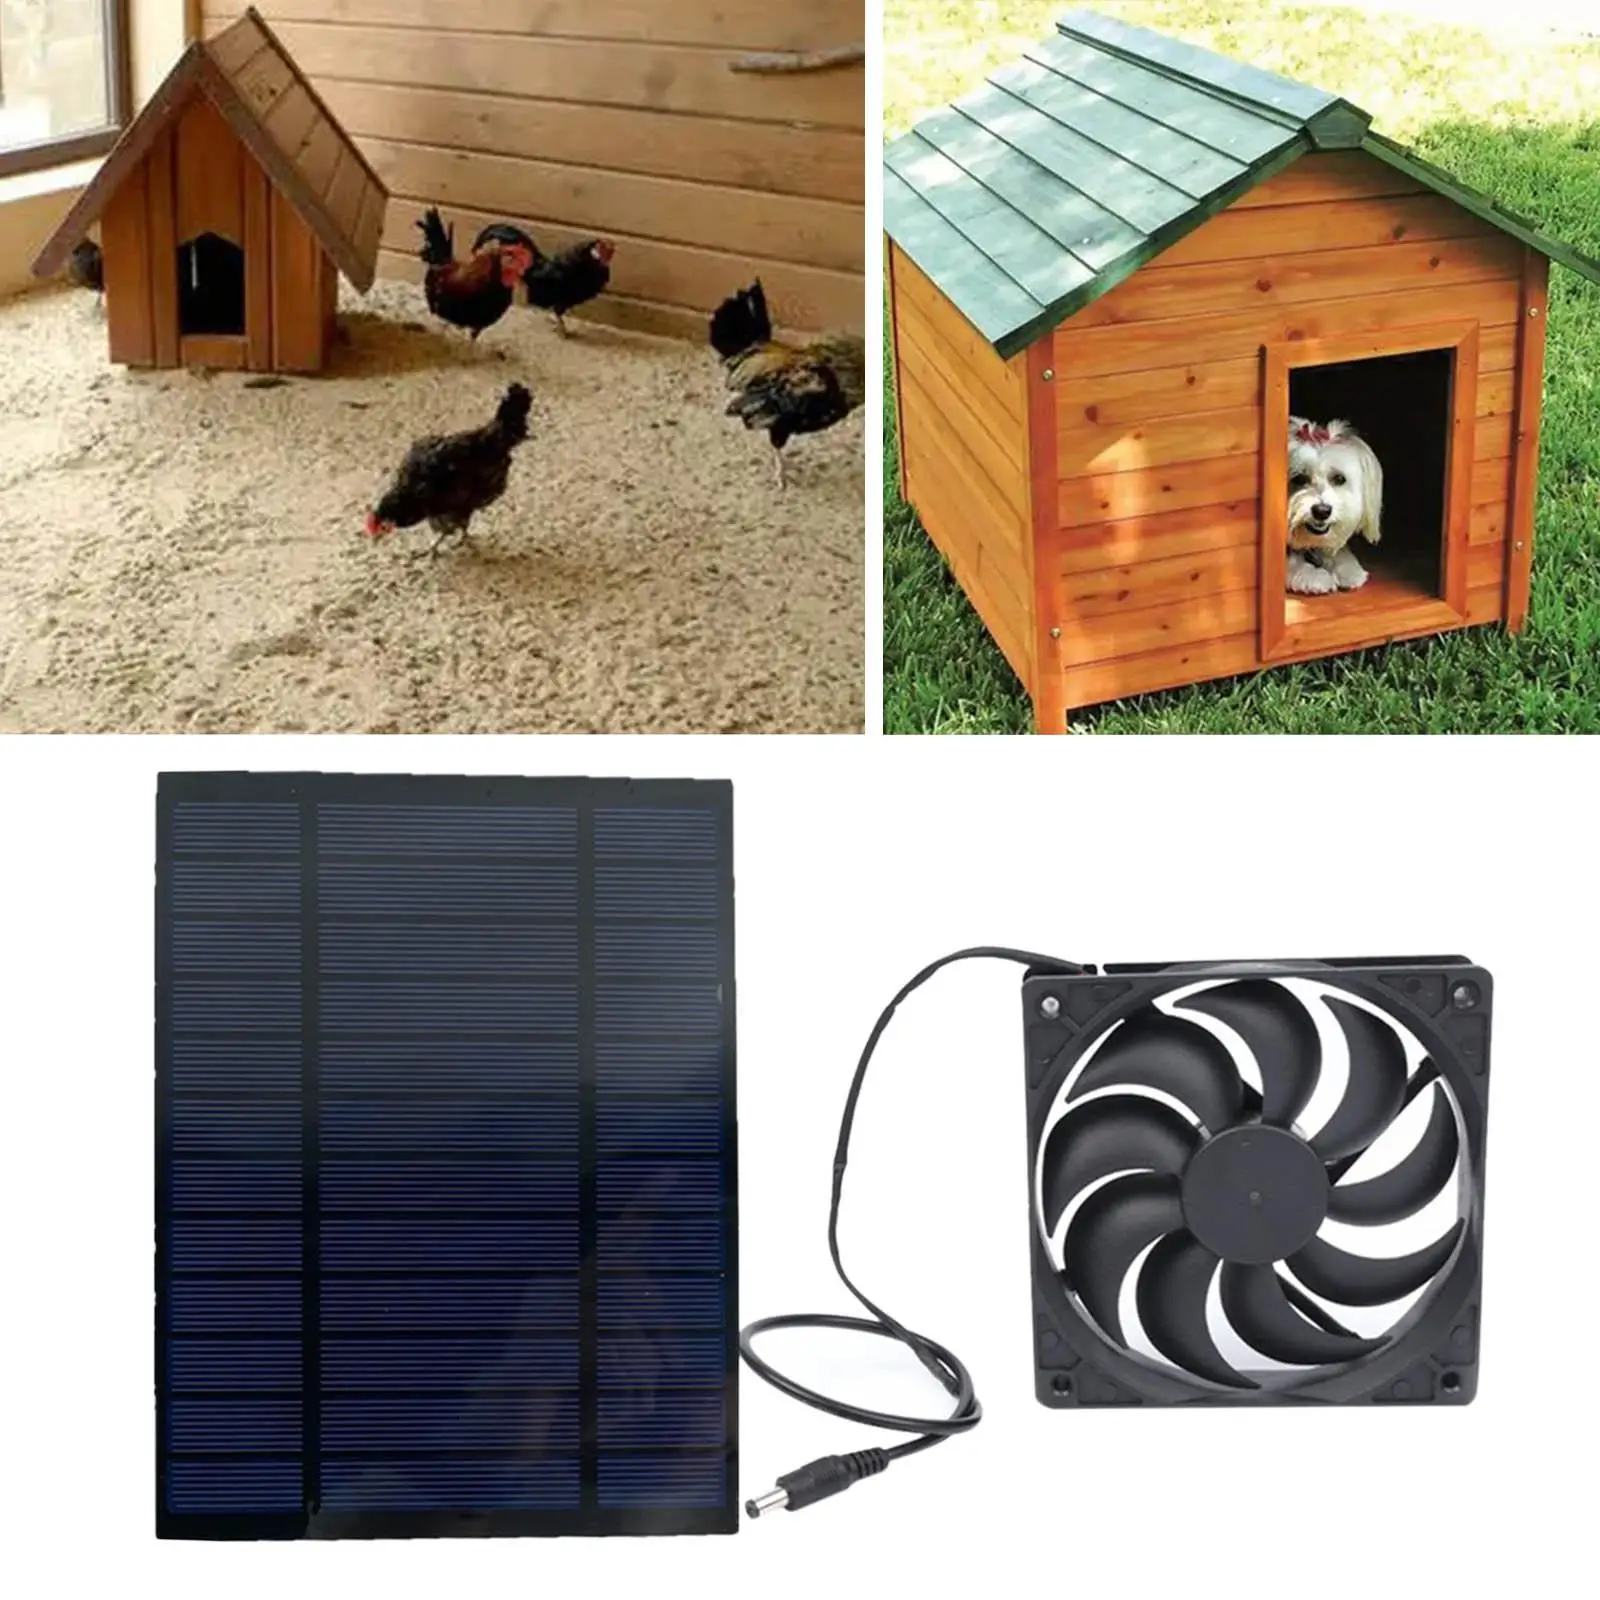 

Energy Saving Solar Powered Panel Fan Portable Outdoor Ventilation Fans for Sheds Travelling Tree Houses Chicken Coop Greenhouse